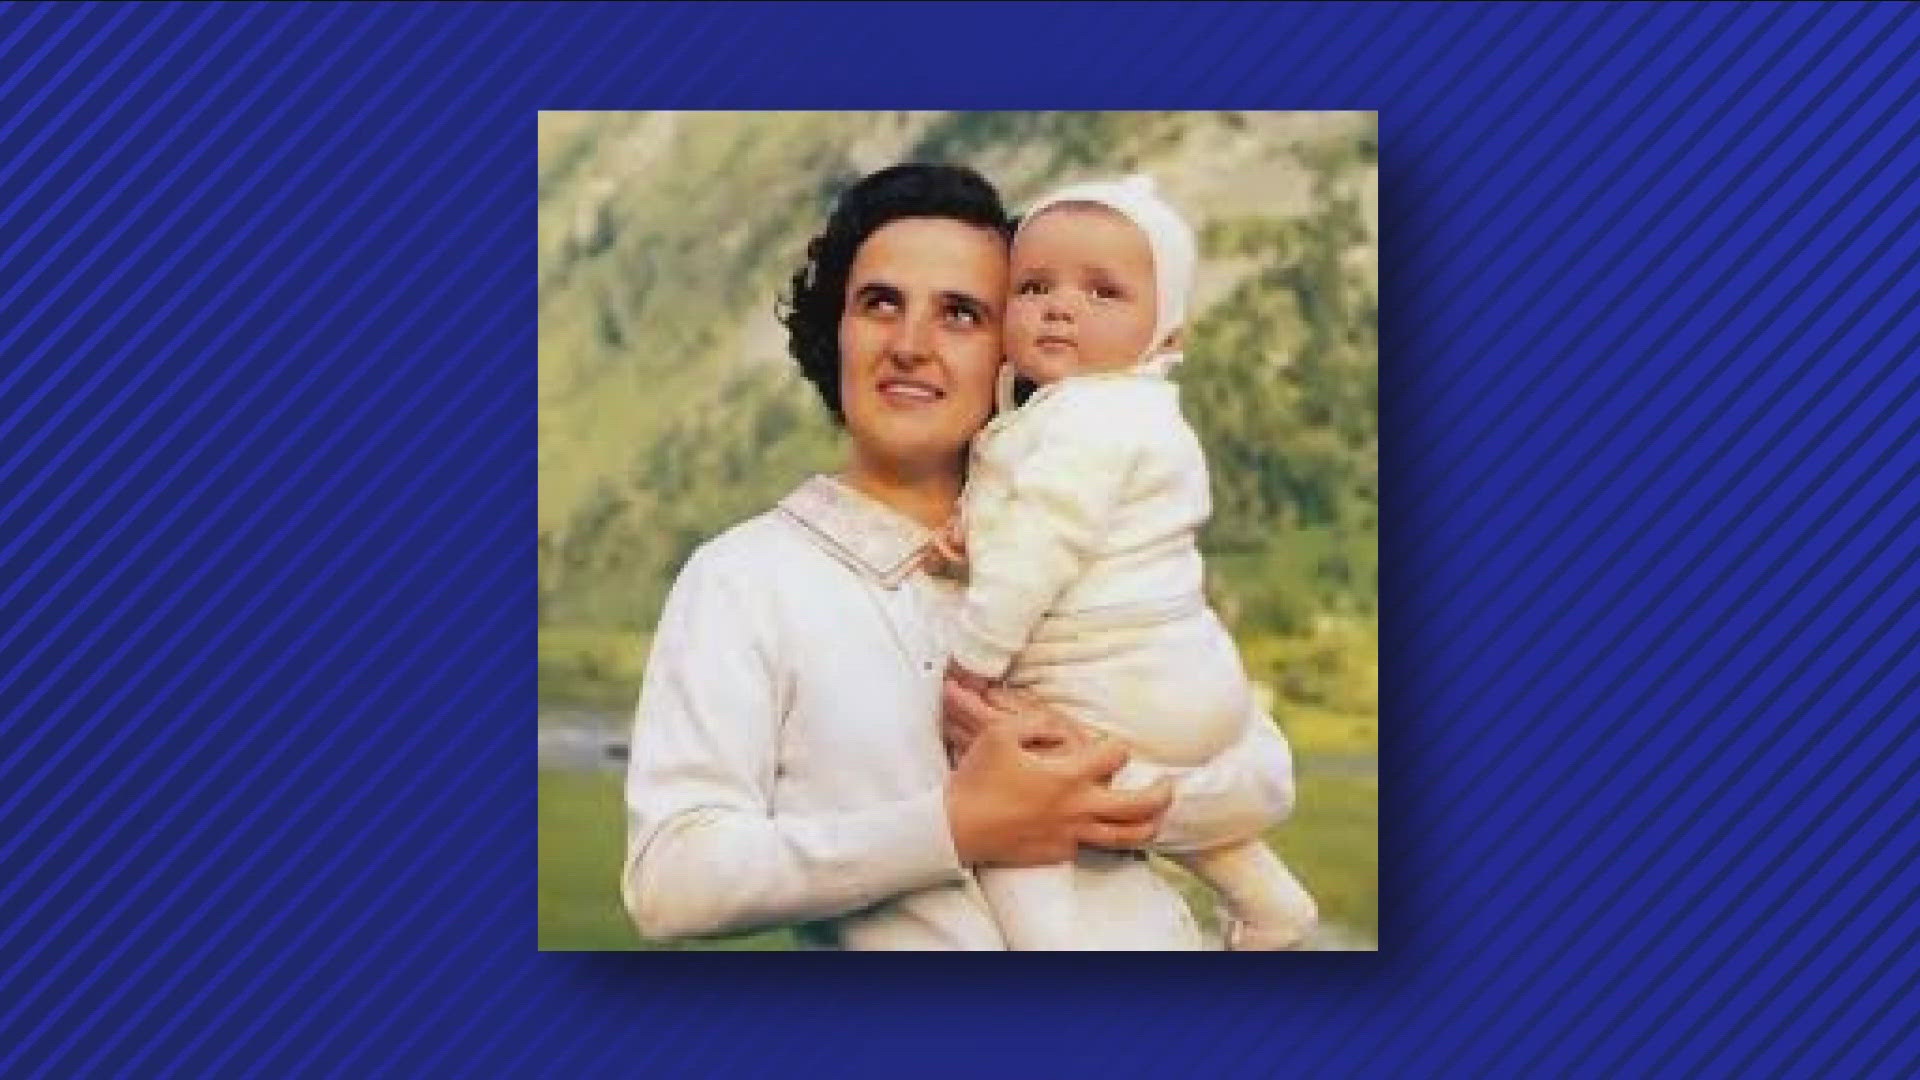 The youngest daughter of St. Gianna Beretta Molla will take part in dedication ceremonies and other public events this weekend.